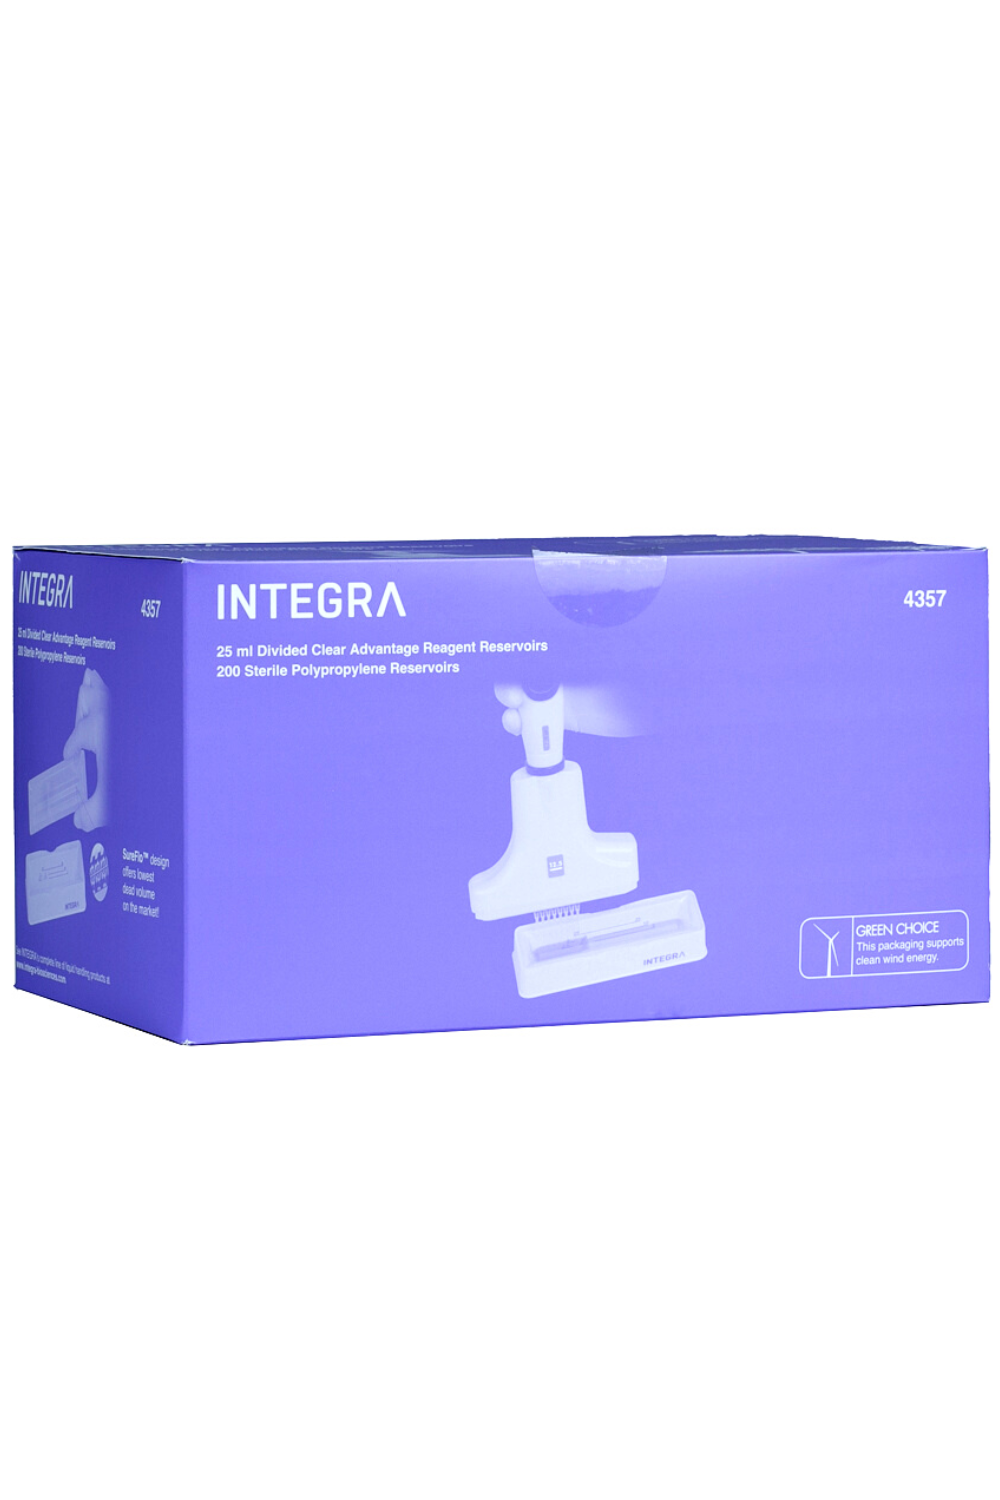 Integra - 25ml Divided Reservoirs, Overpack of 3 cases (4357)